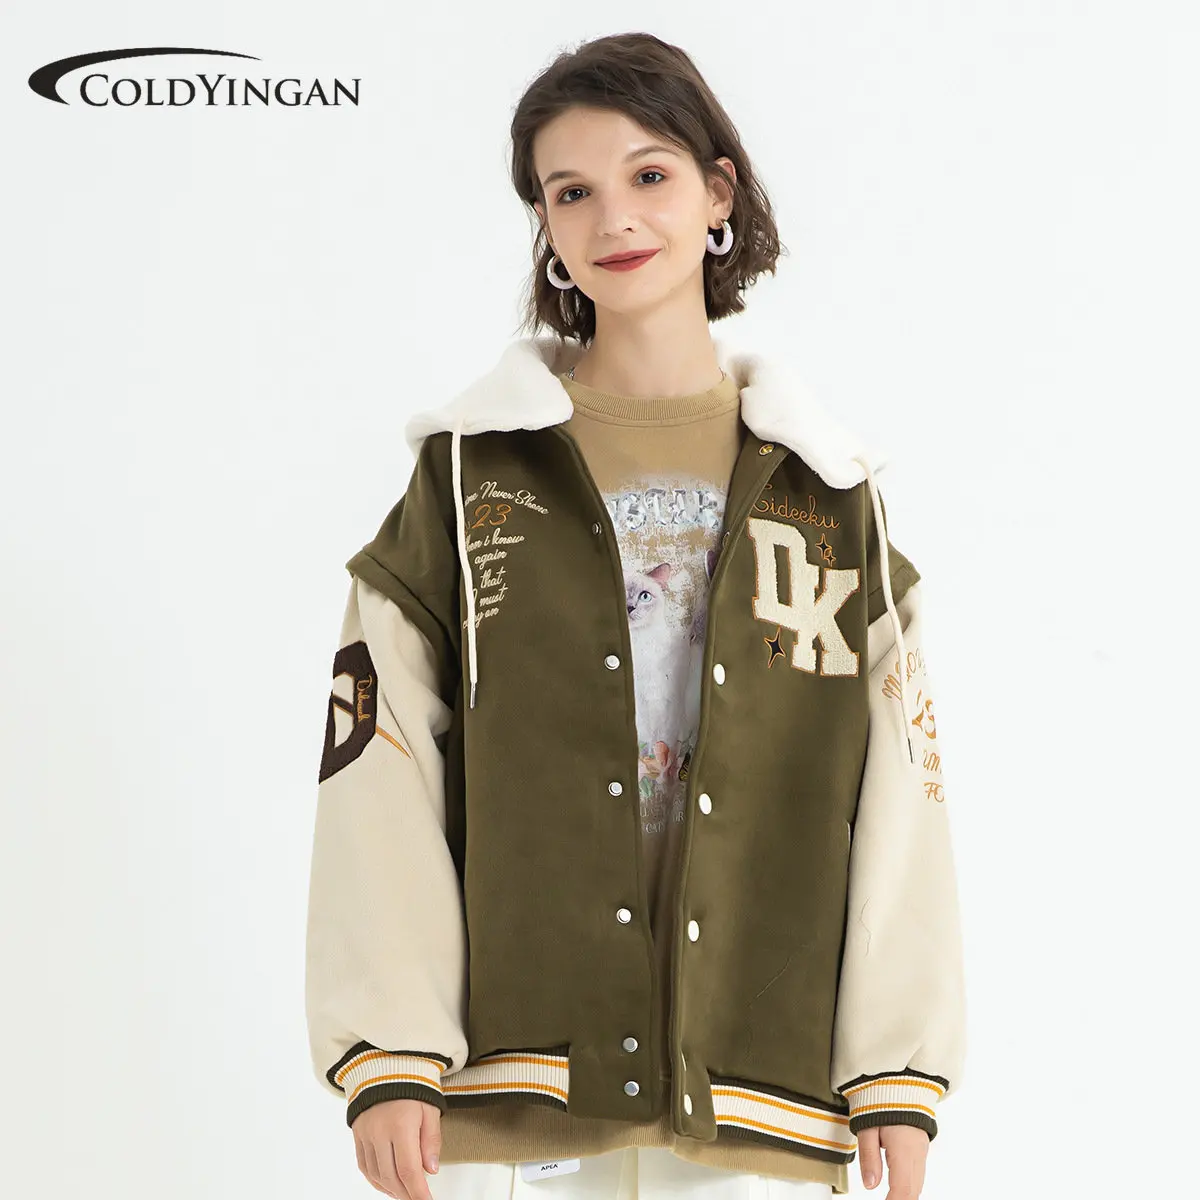 Women's American Retro Letter Embroidery Jackets Coat Baseball Jacket Winter Hooded Hip Hop Loose All-match Fashion Top Clothes